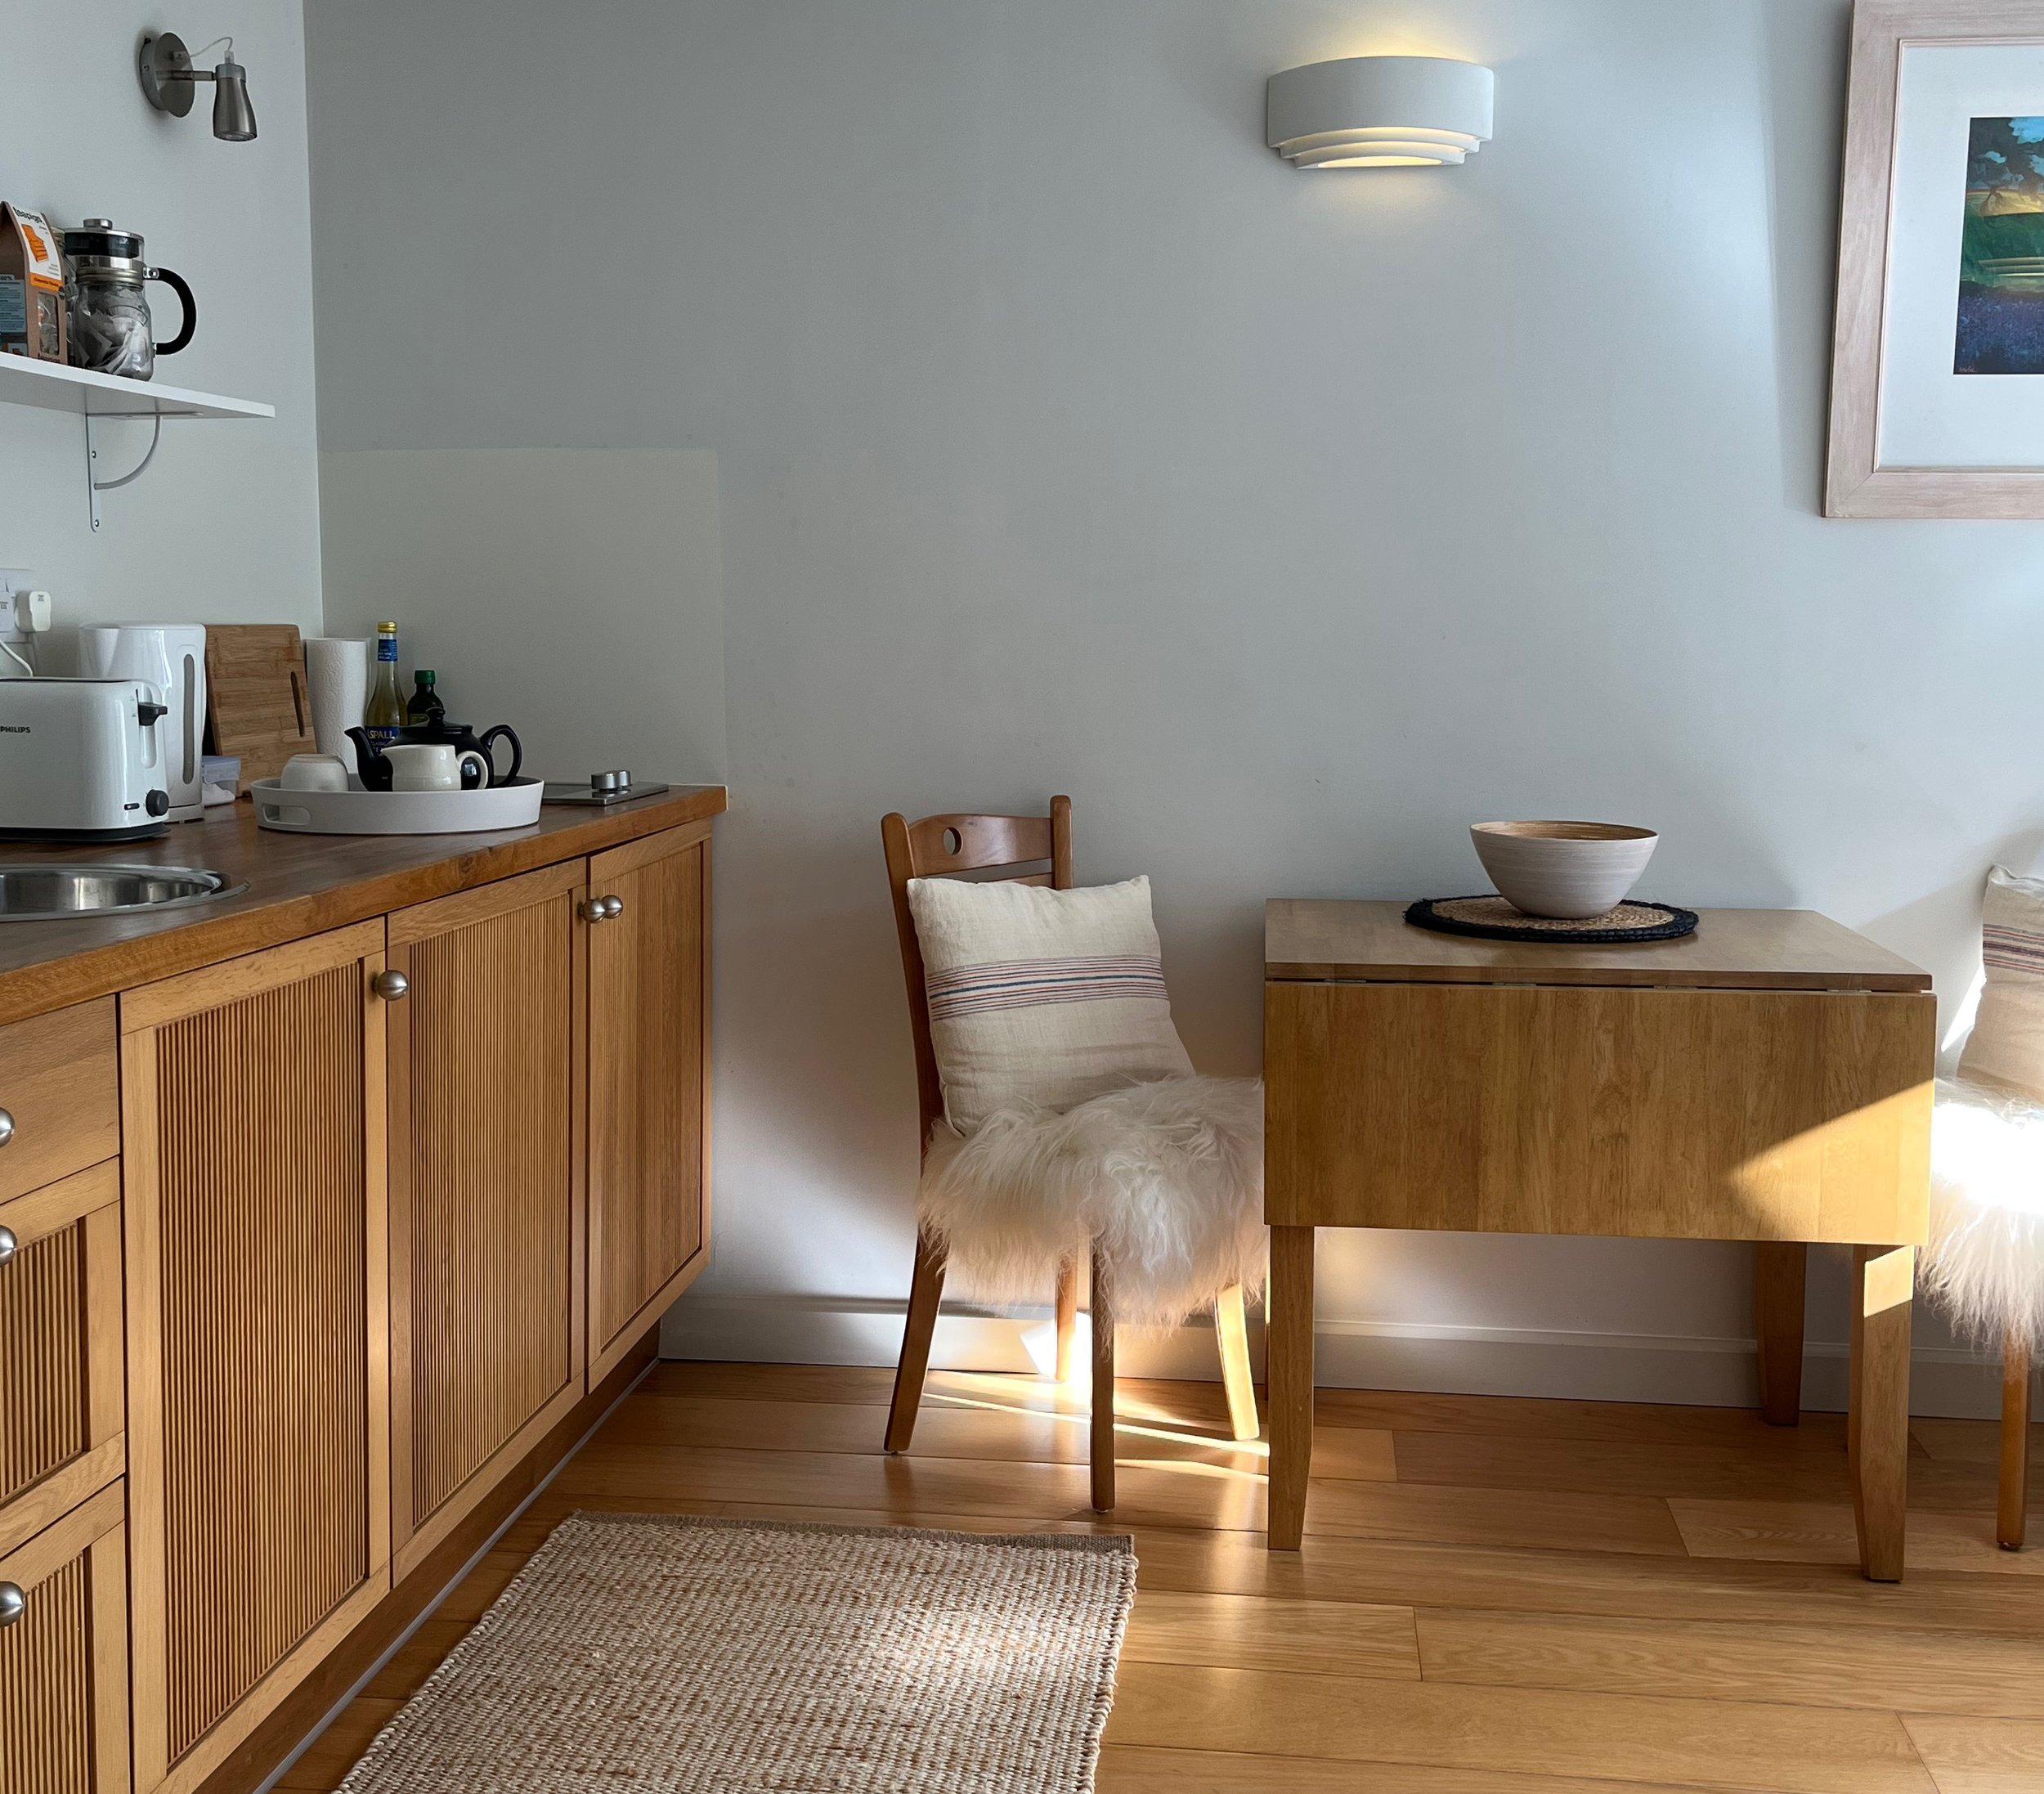 Ennys Cornwall_Trencrom Studio Suite kitchen and dining (Copy)